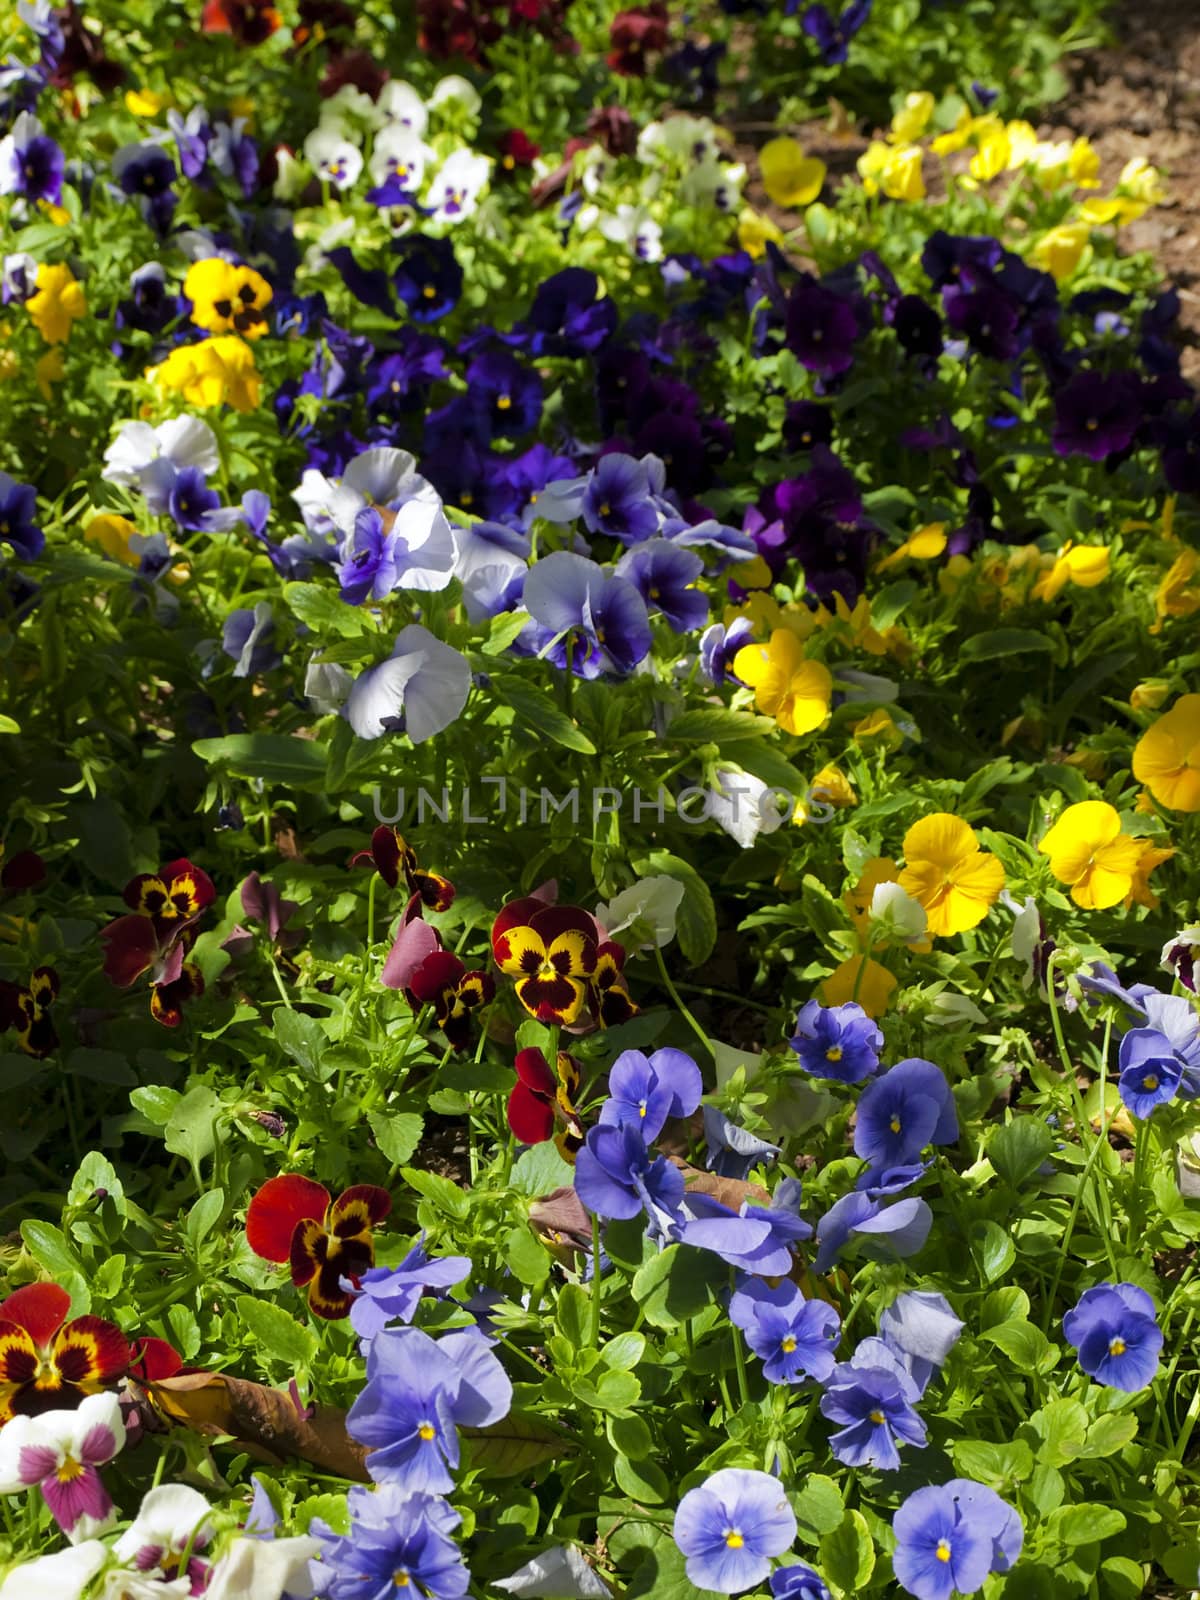 A vivid and colourful flowerbed made of pansies